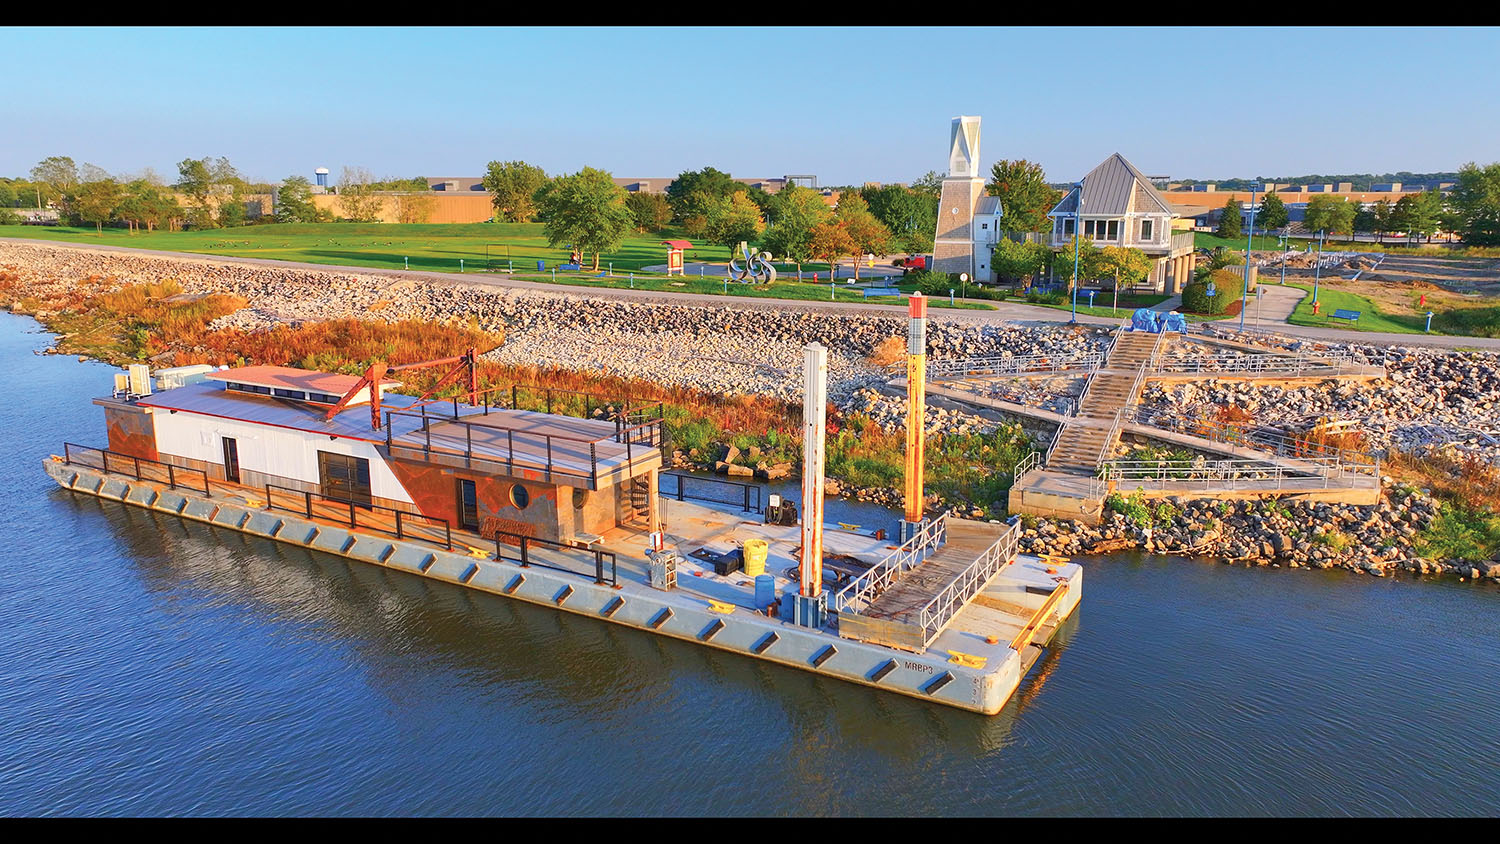 The new educational barge, called the Mississippi River Institute, will focus on teaching 11th and 12th graders about available careers on the river. (Photo courtesy of Living Lands & Waters)